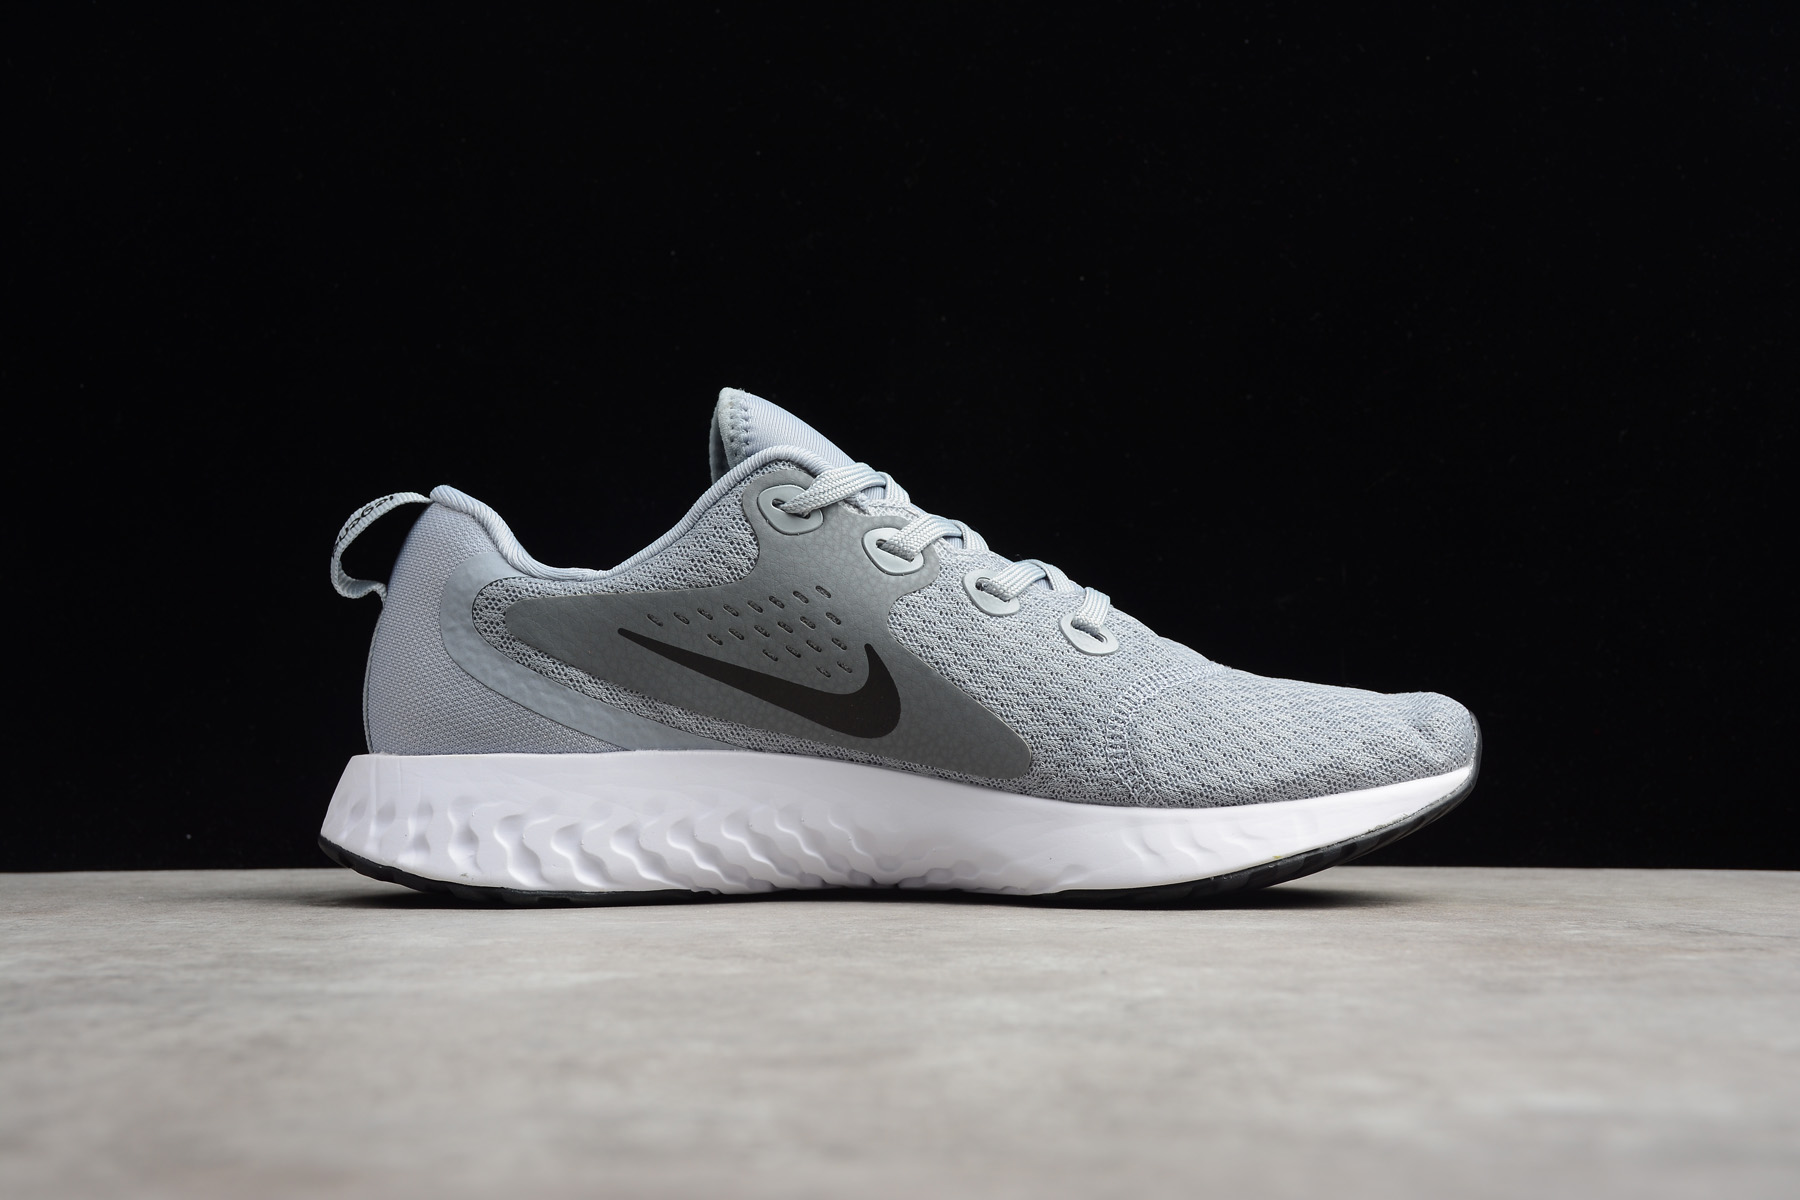 Nike Odyssey React Flyknit Gray/White Running Shoes AA1625-201